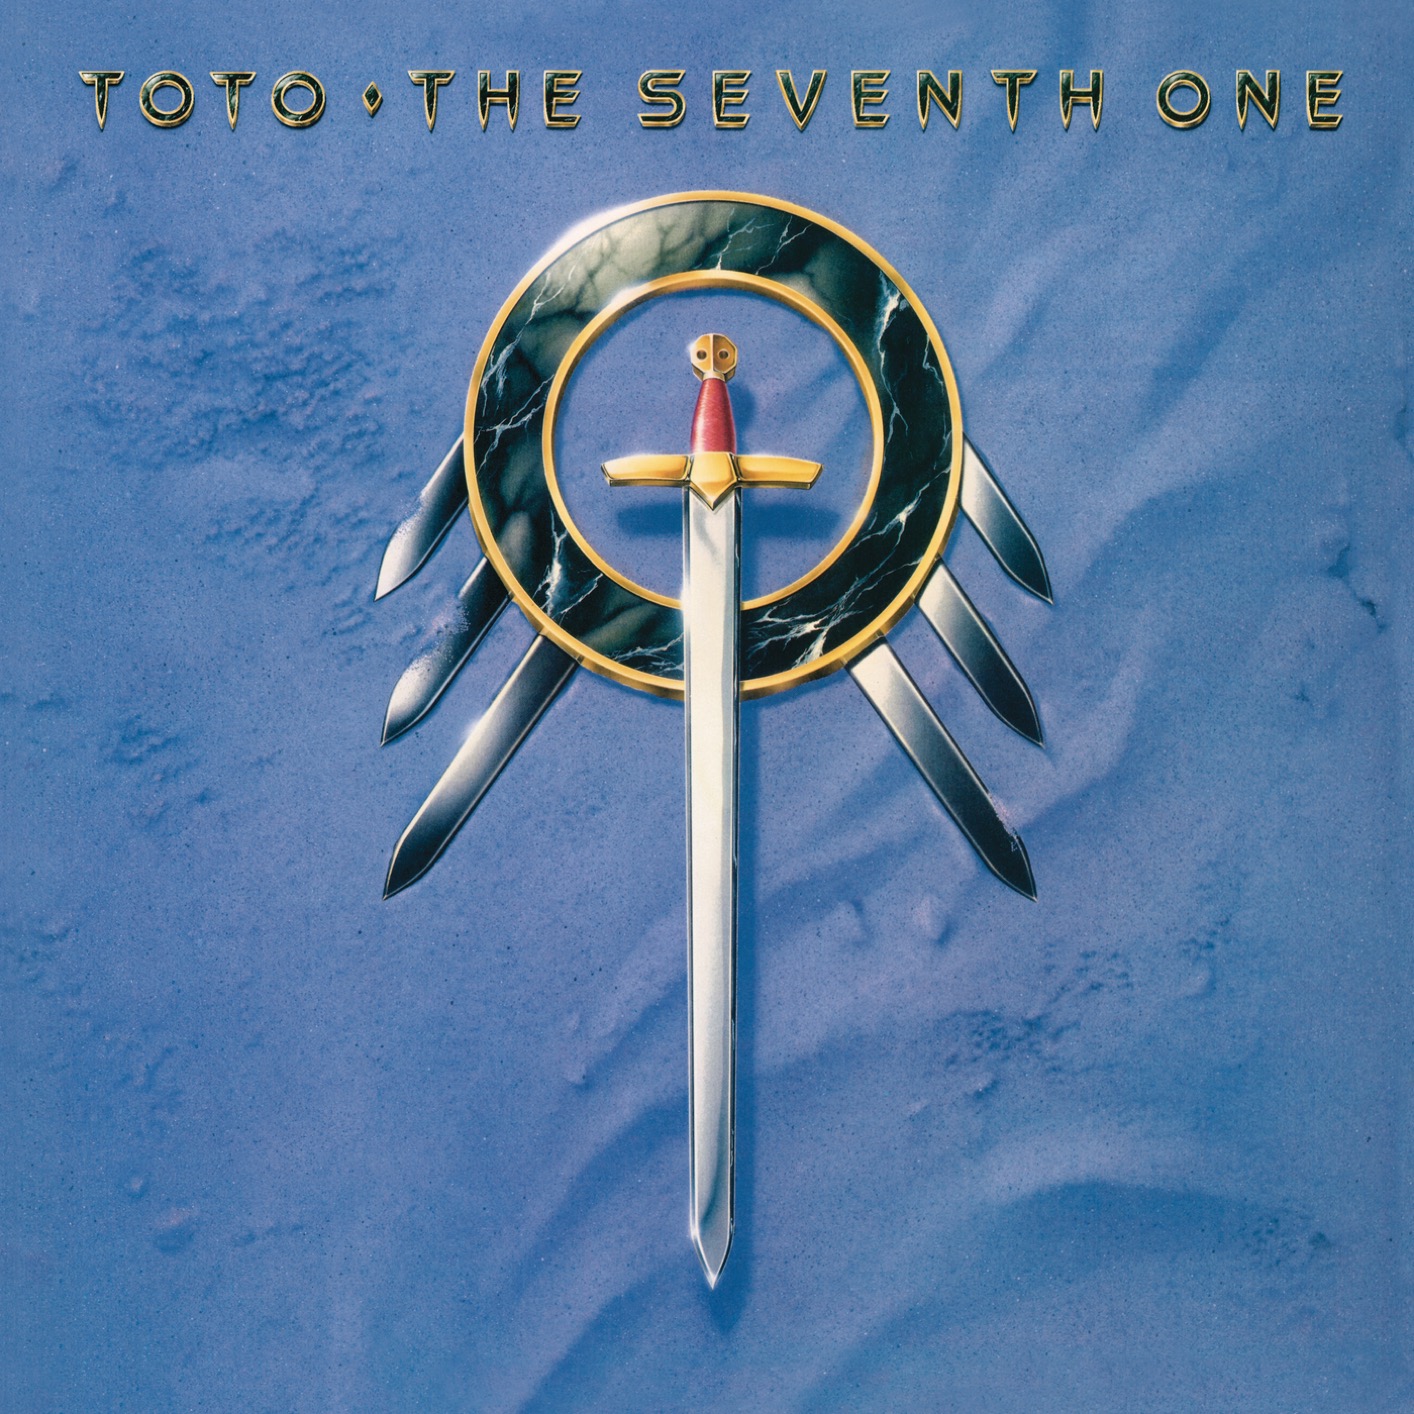 Toto - The Seventh One (Remastered) (1988/2020) [FLAC 24bit/192kHz]